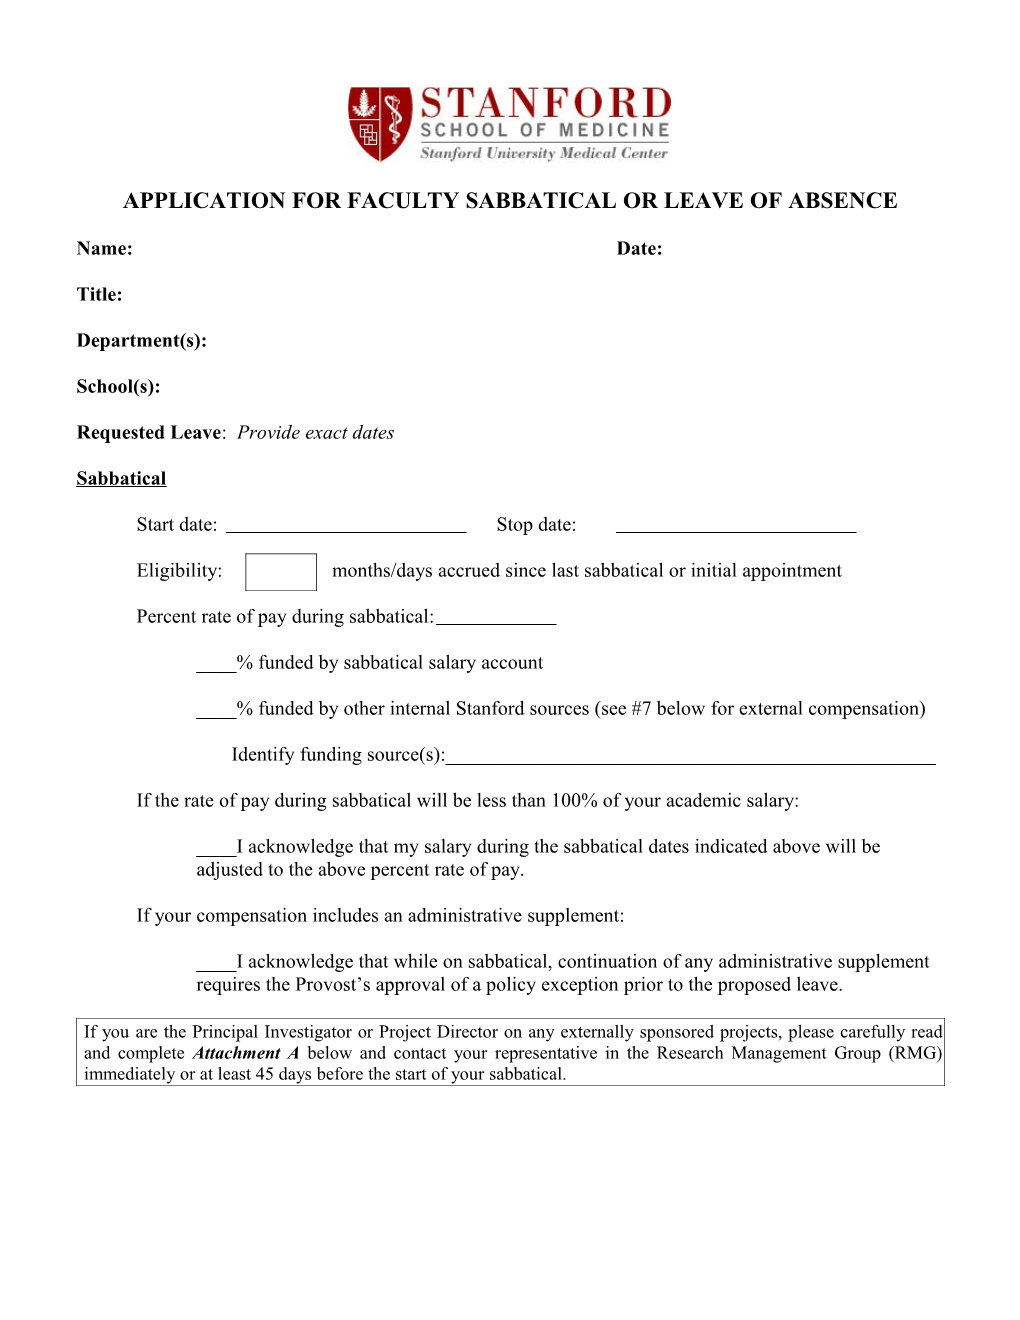 Application for Faculty Sabbatical Or Leave of Absence